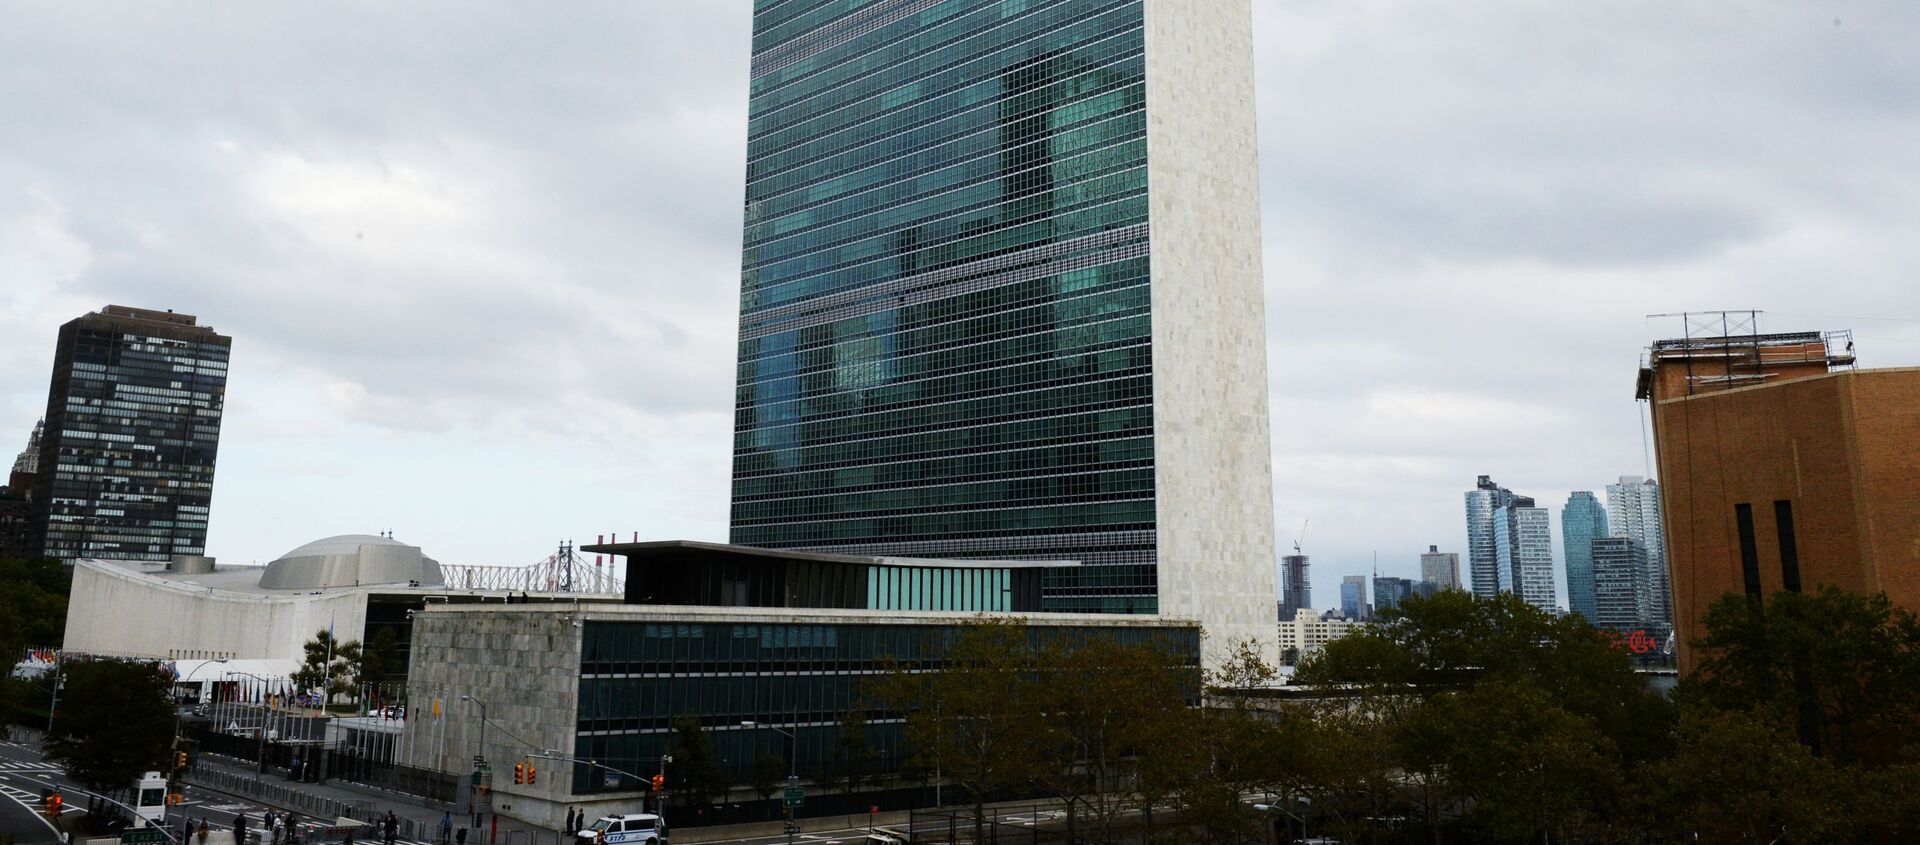 The United Nations Headquarters in the run-up to the 70th UN General Assembly session - Sputnik International, 1920, 06.11.2019